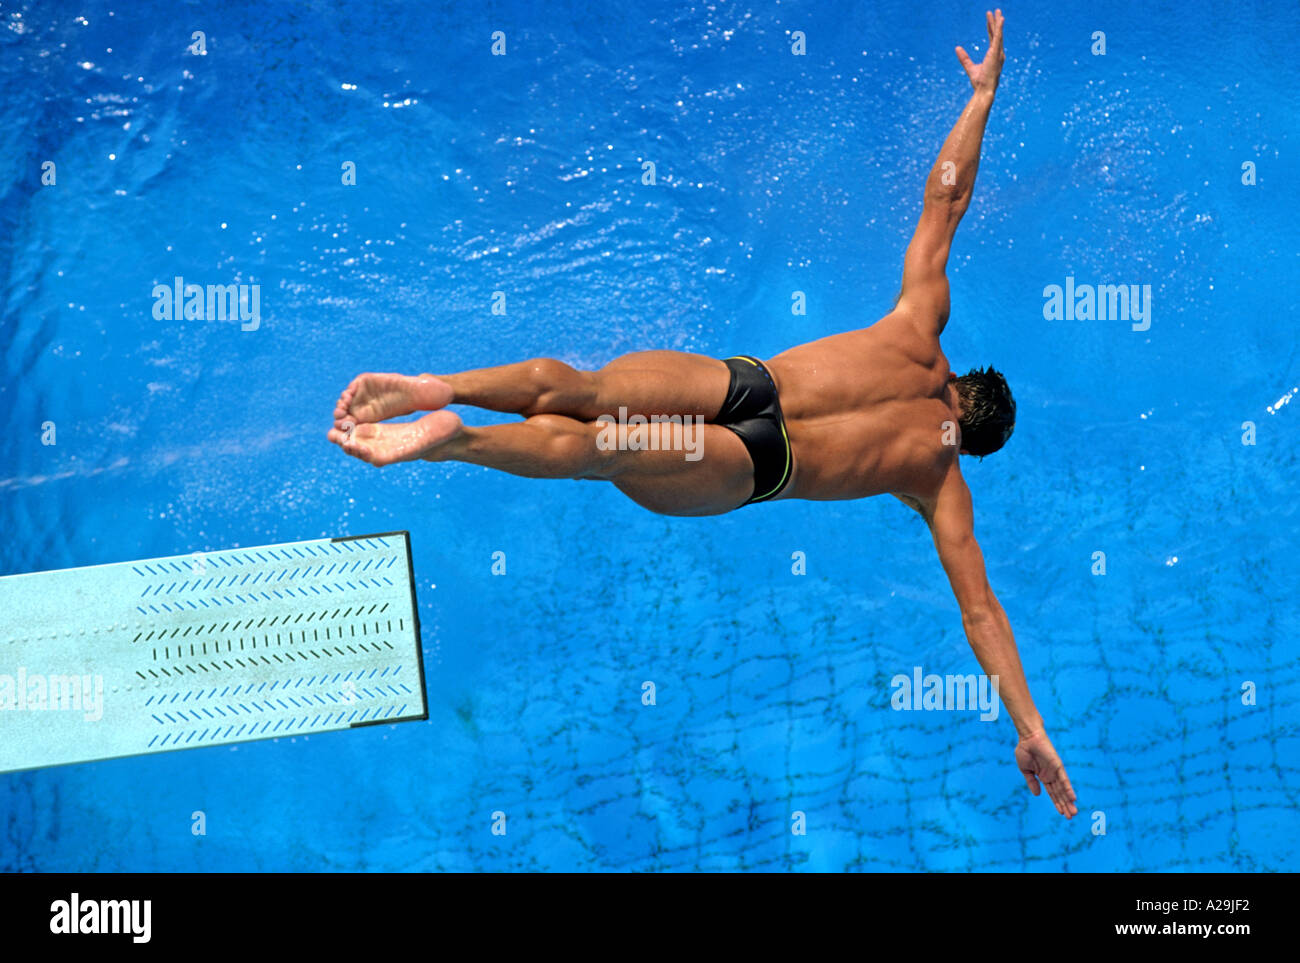 Overhead view of a male springboard diver forming a crucifix shape as he  plunges into the pool during a dive Stock Photo - Alamy